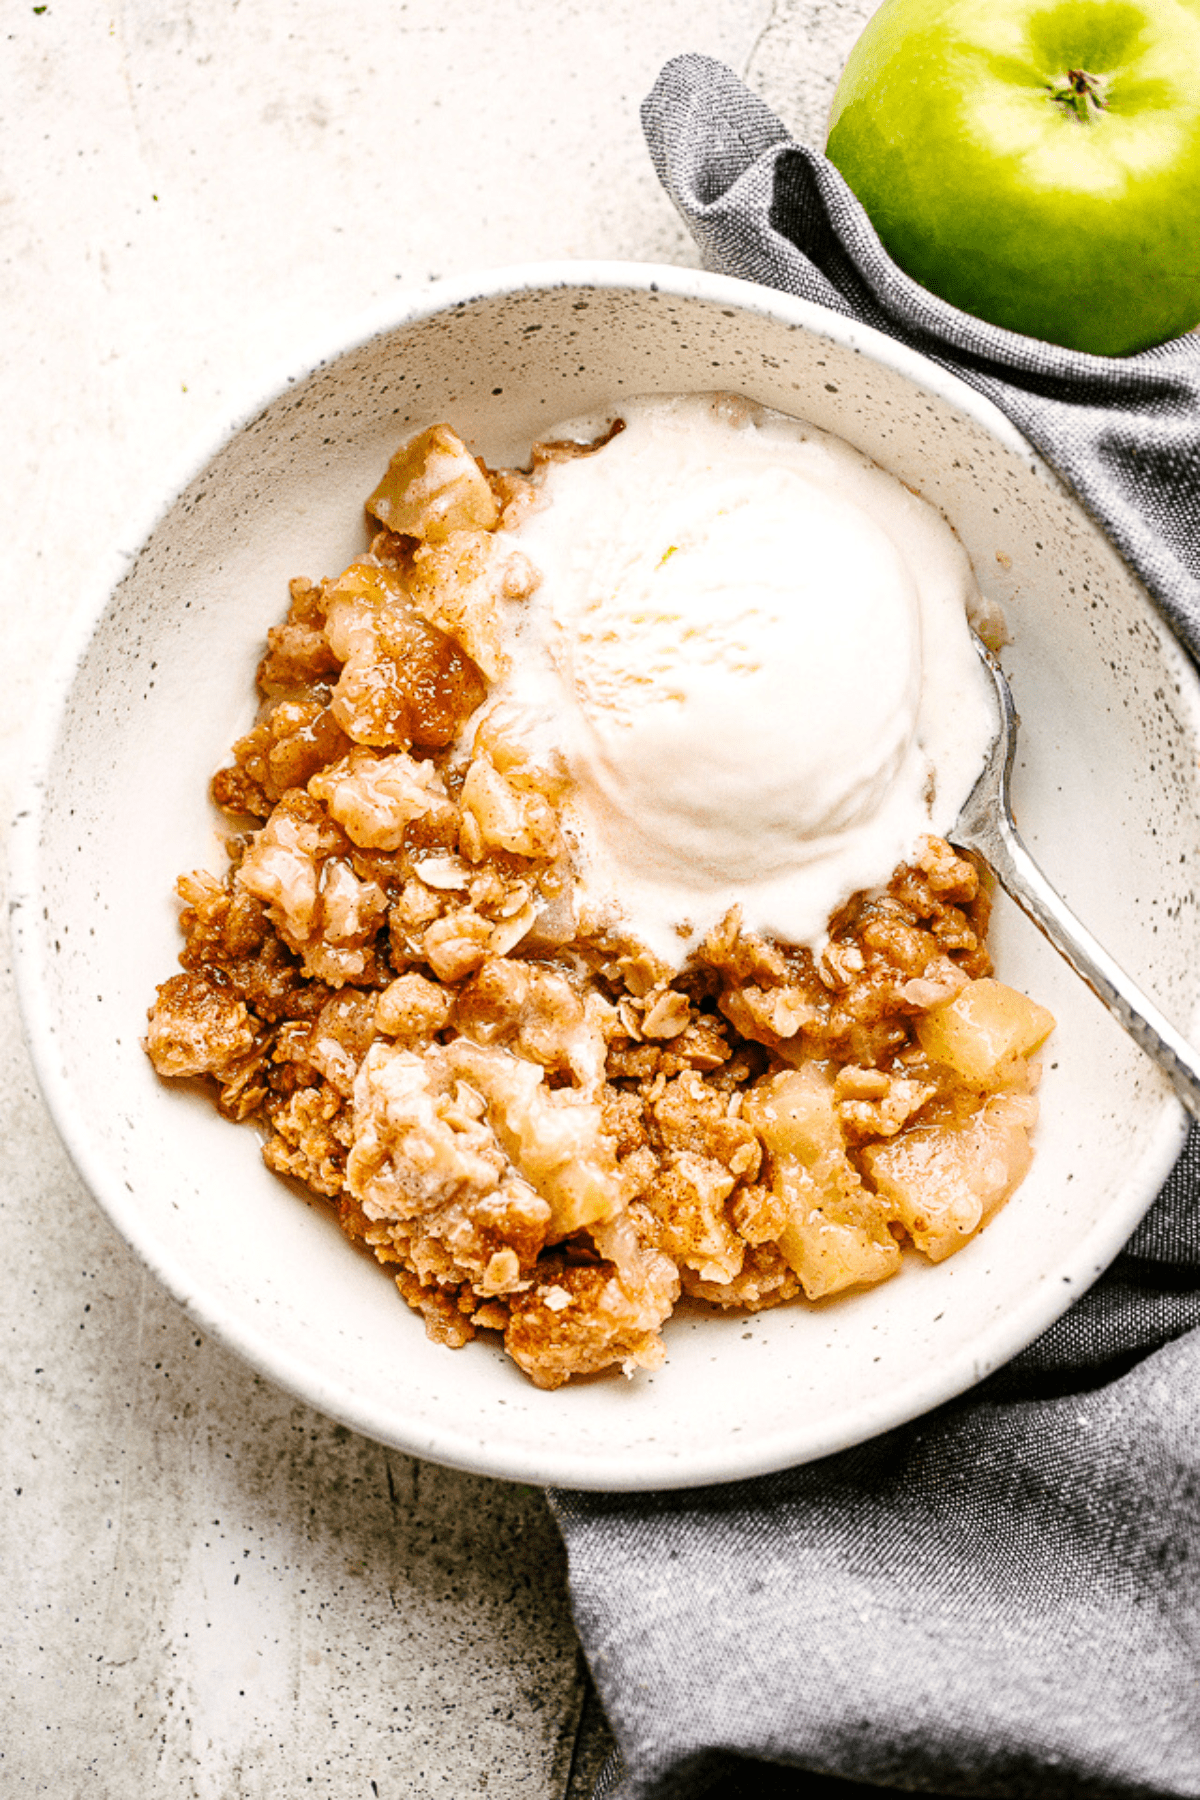 Overhead shot of Apple Crumble served in a bowl with vanilla ice cream, and a green apple placed on the right side of the bowl.